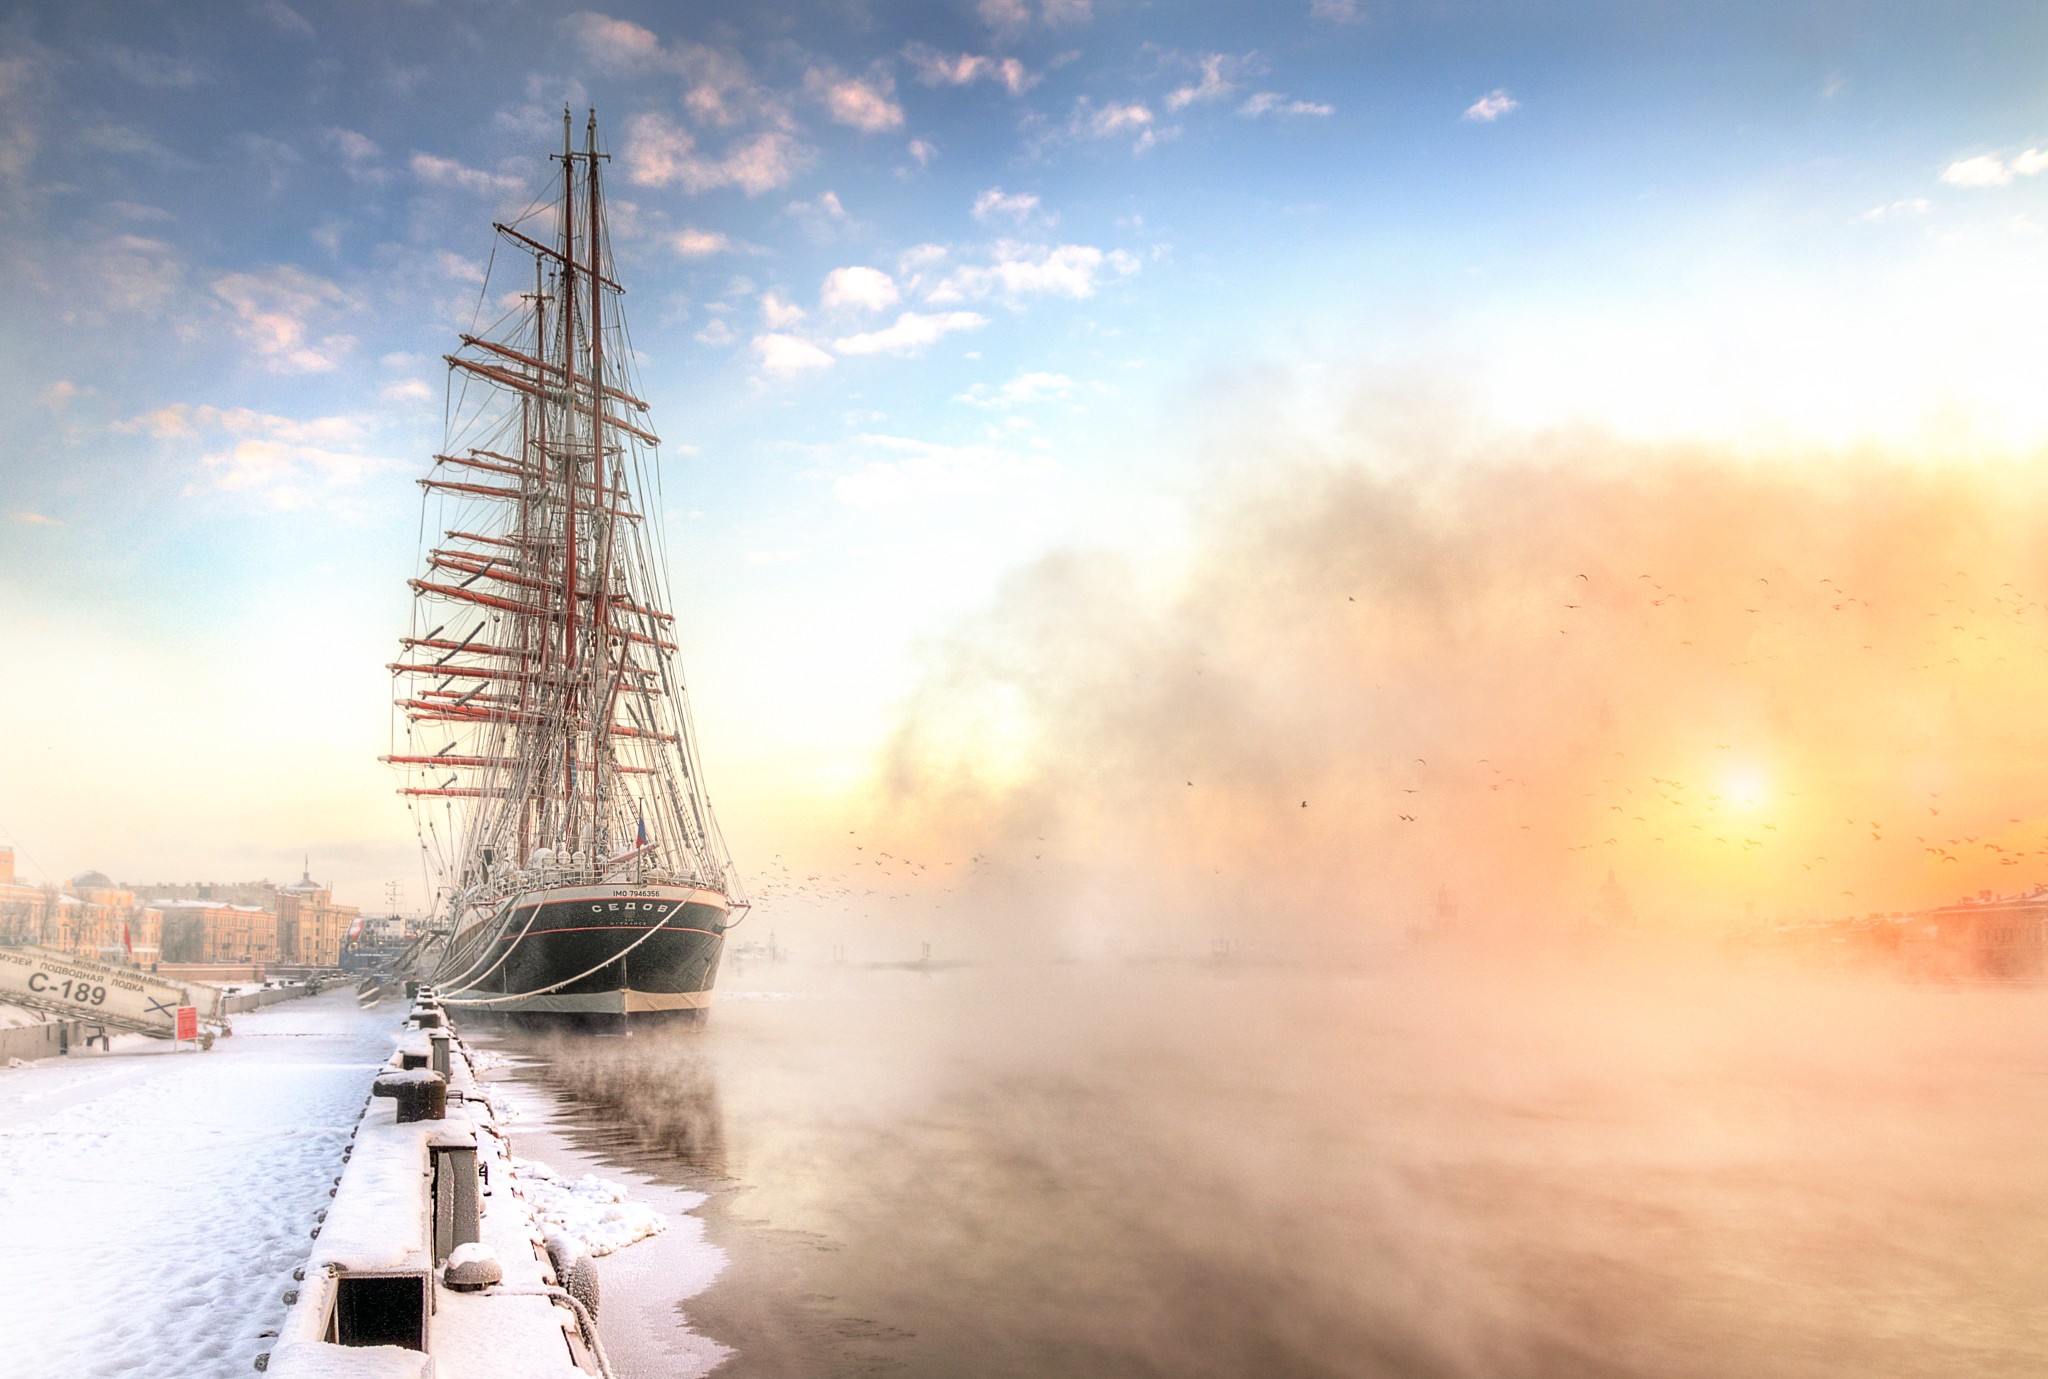 General 2048x1379 St. Petersburg Russia ship urban mist ports sailing ship vehicle rigging (ship) sunlight winter cold ice snow sky clouds